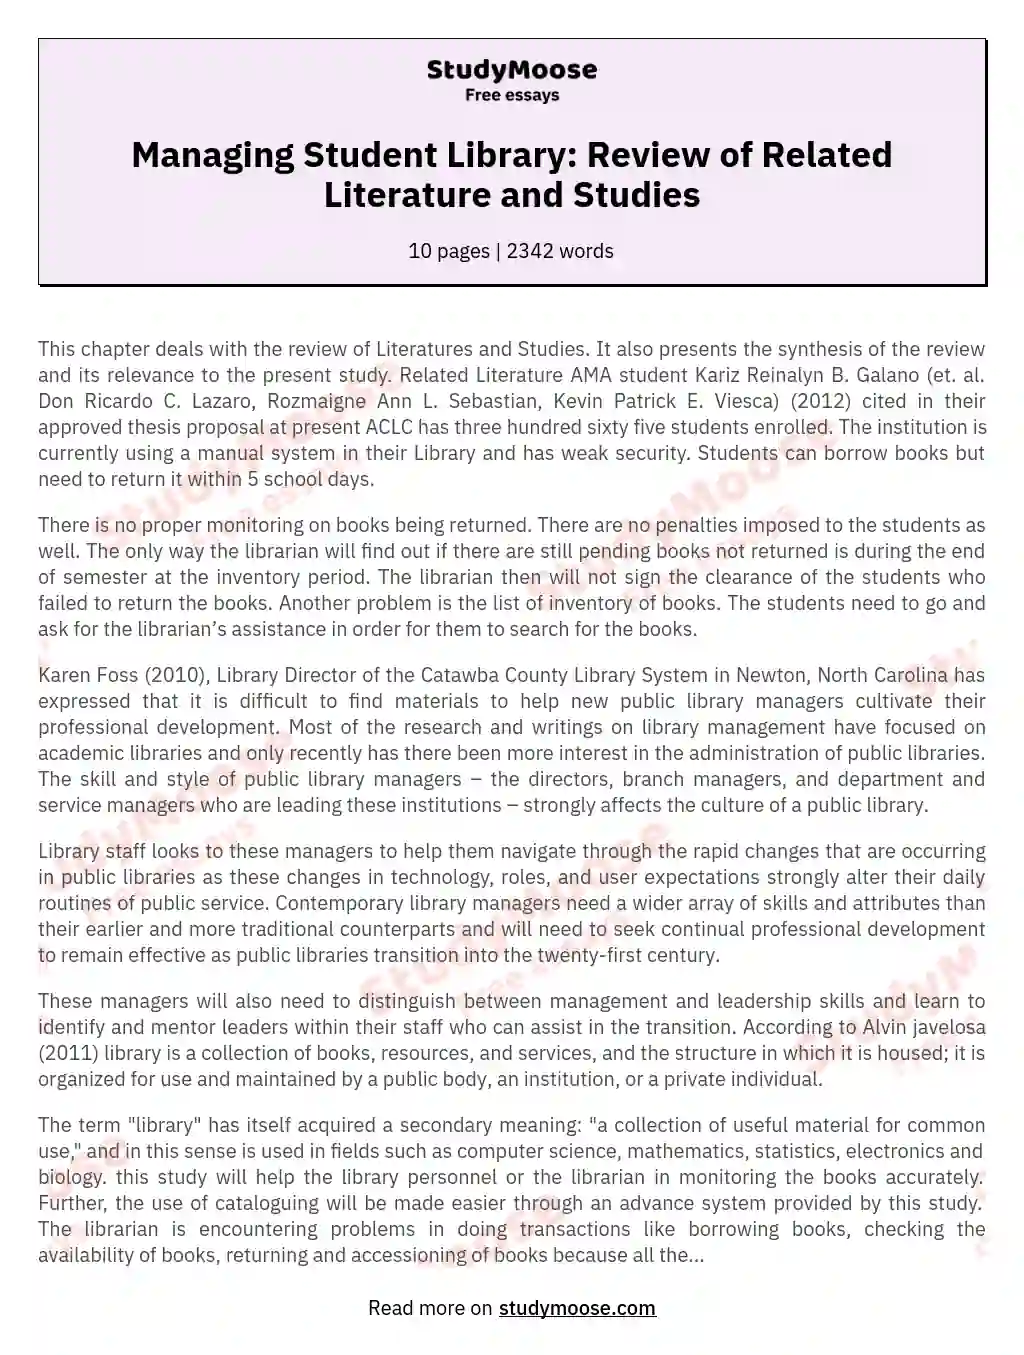 Managing Student Library: Review of Related Literature and Studies